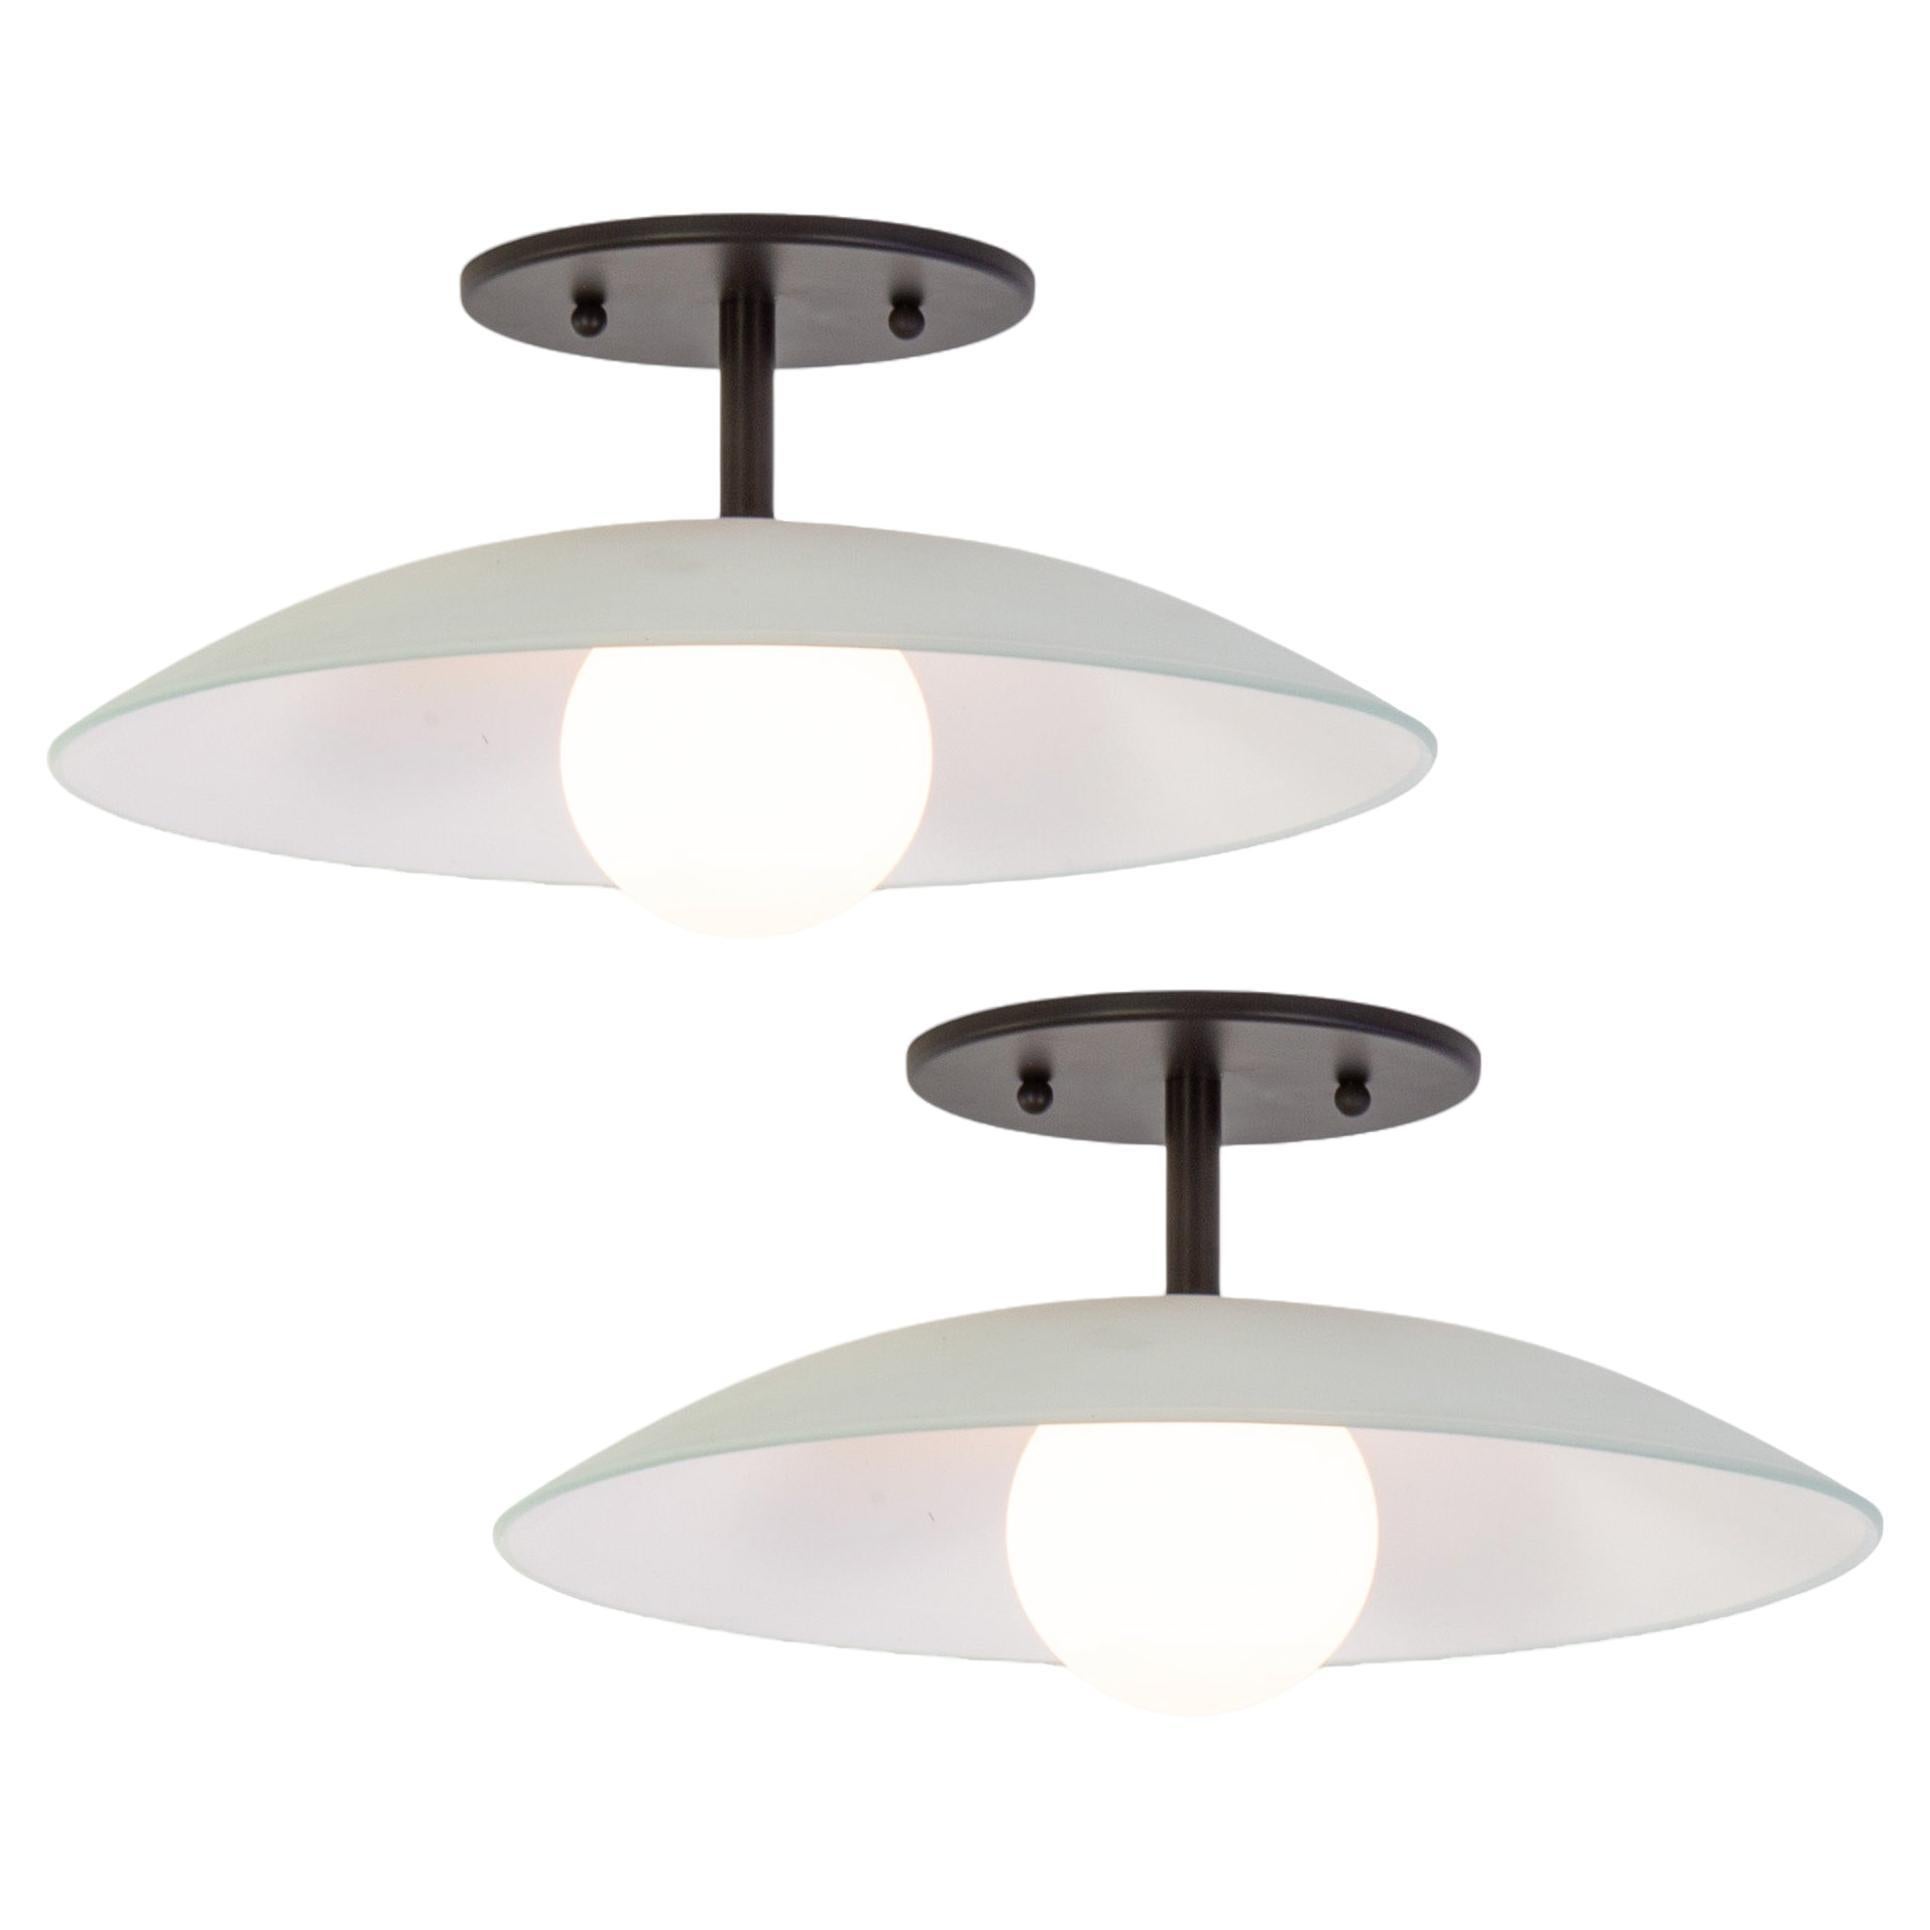 Pair of Dish Flush Mounts, by Research.Lighting, Glass Dome Shade, Made to order